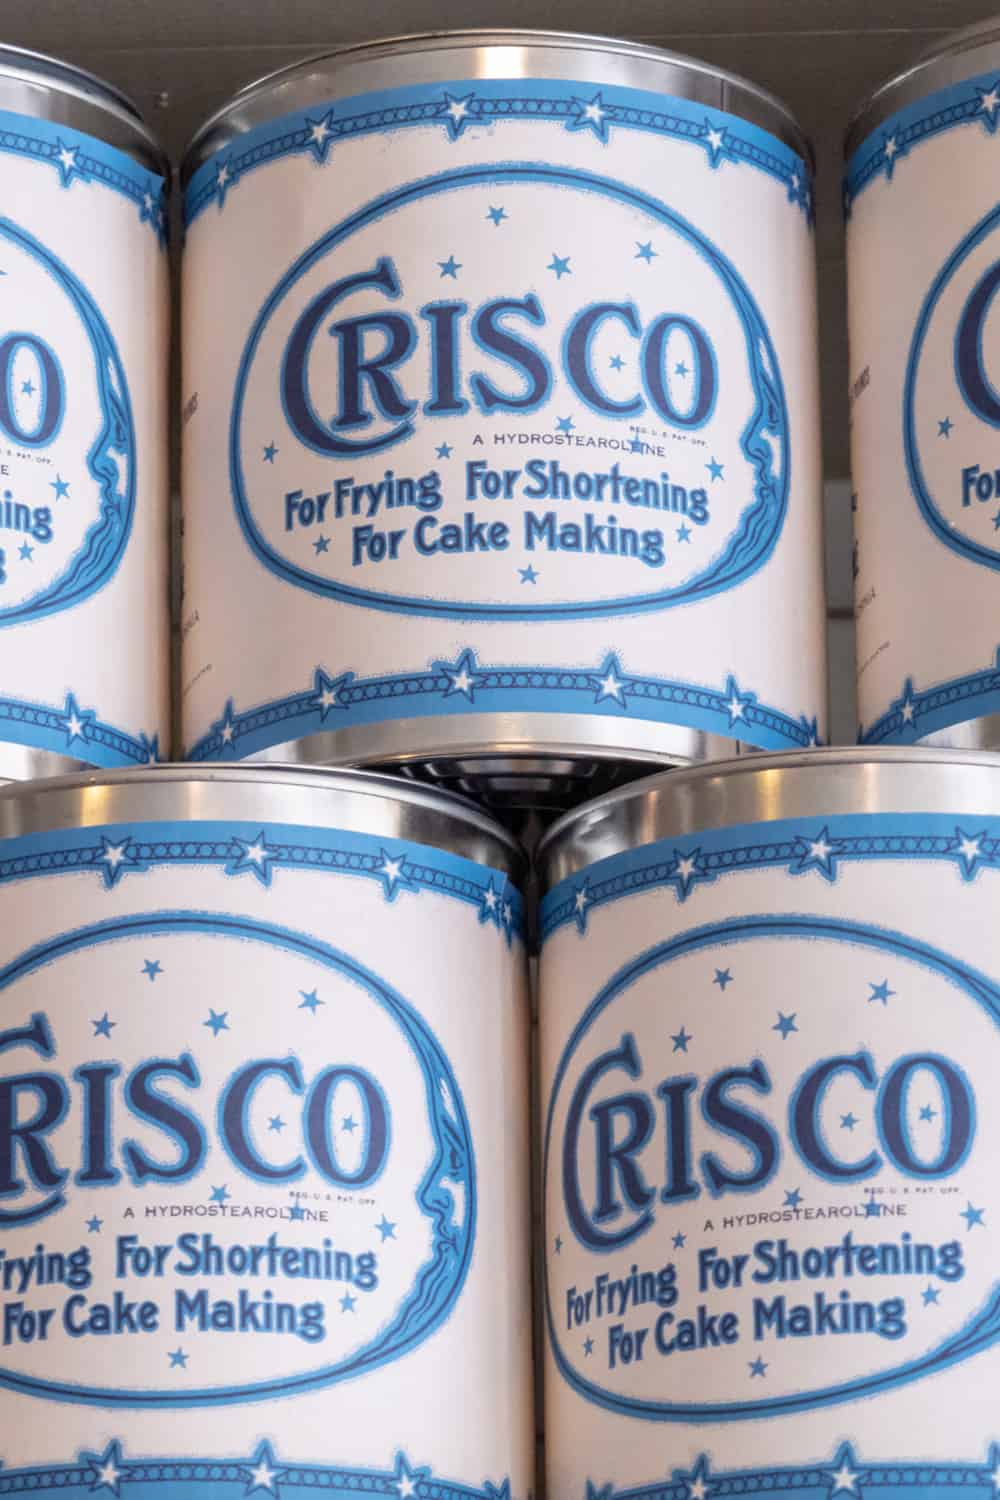 The Risk of Consuming Expired Crisco